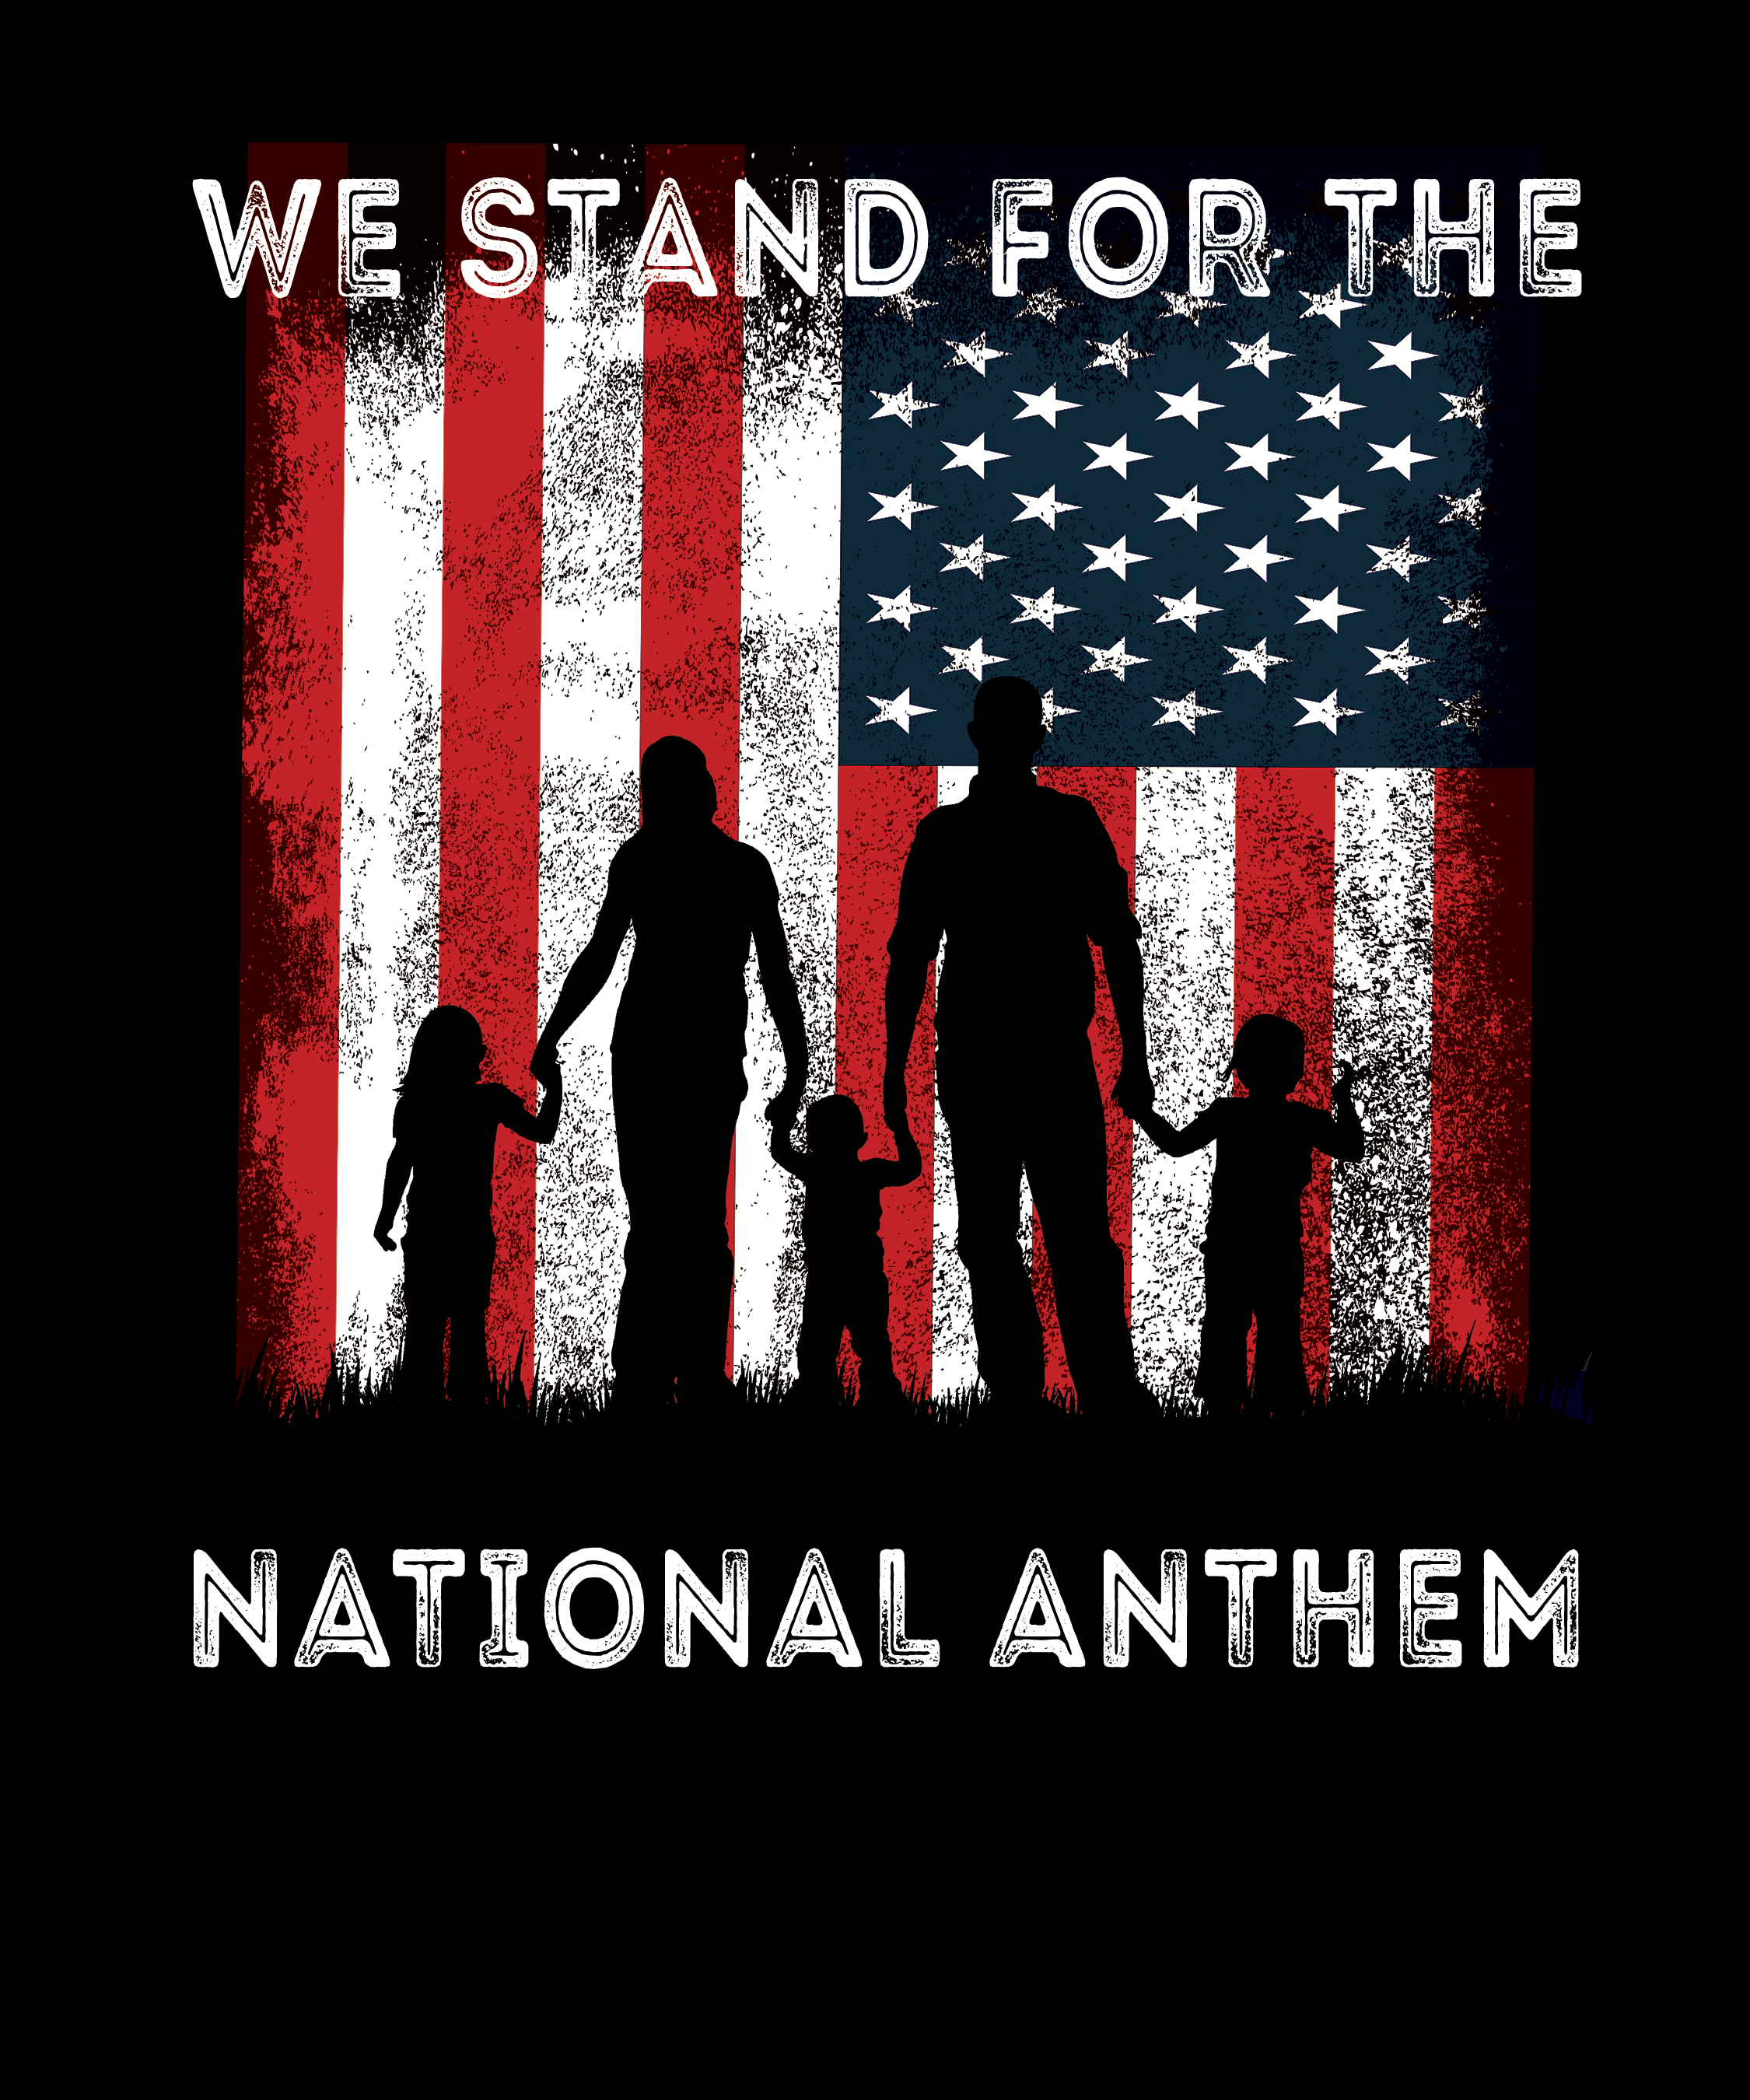 We Stand For The National Anthem T Shirt - Hoodie - V Neck Shirt ...